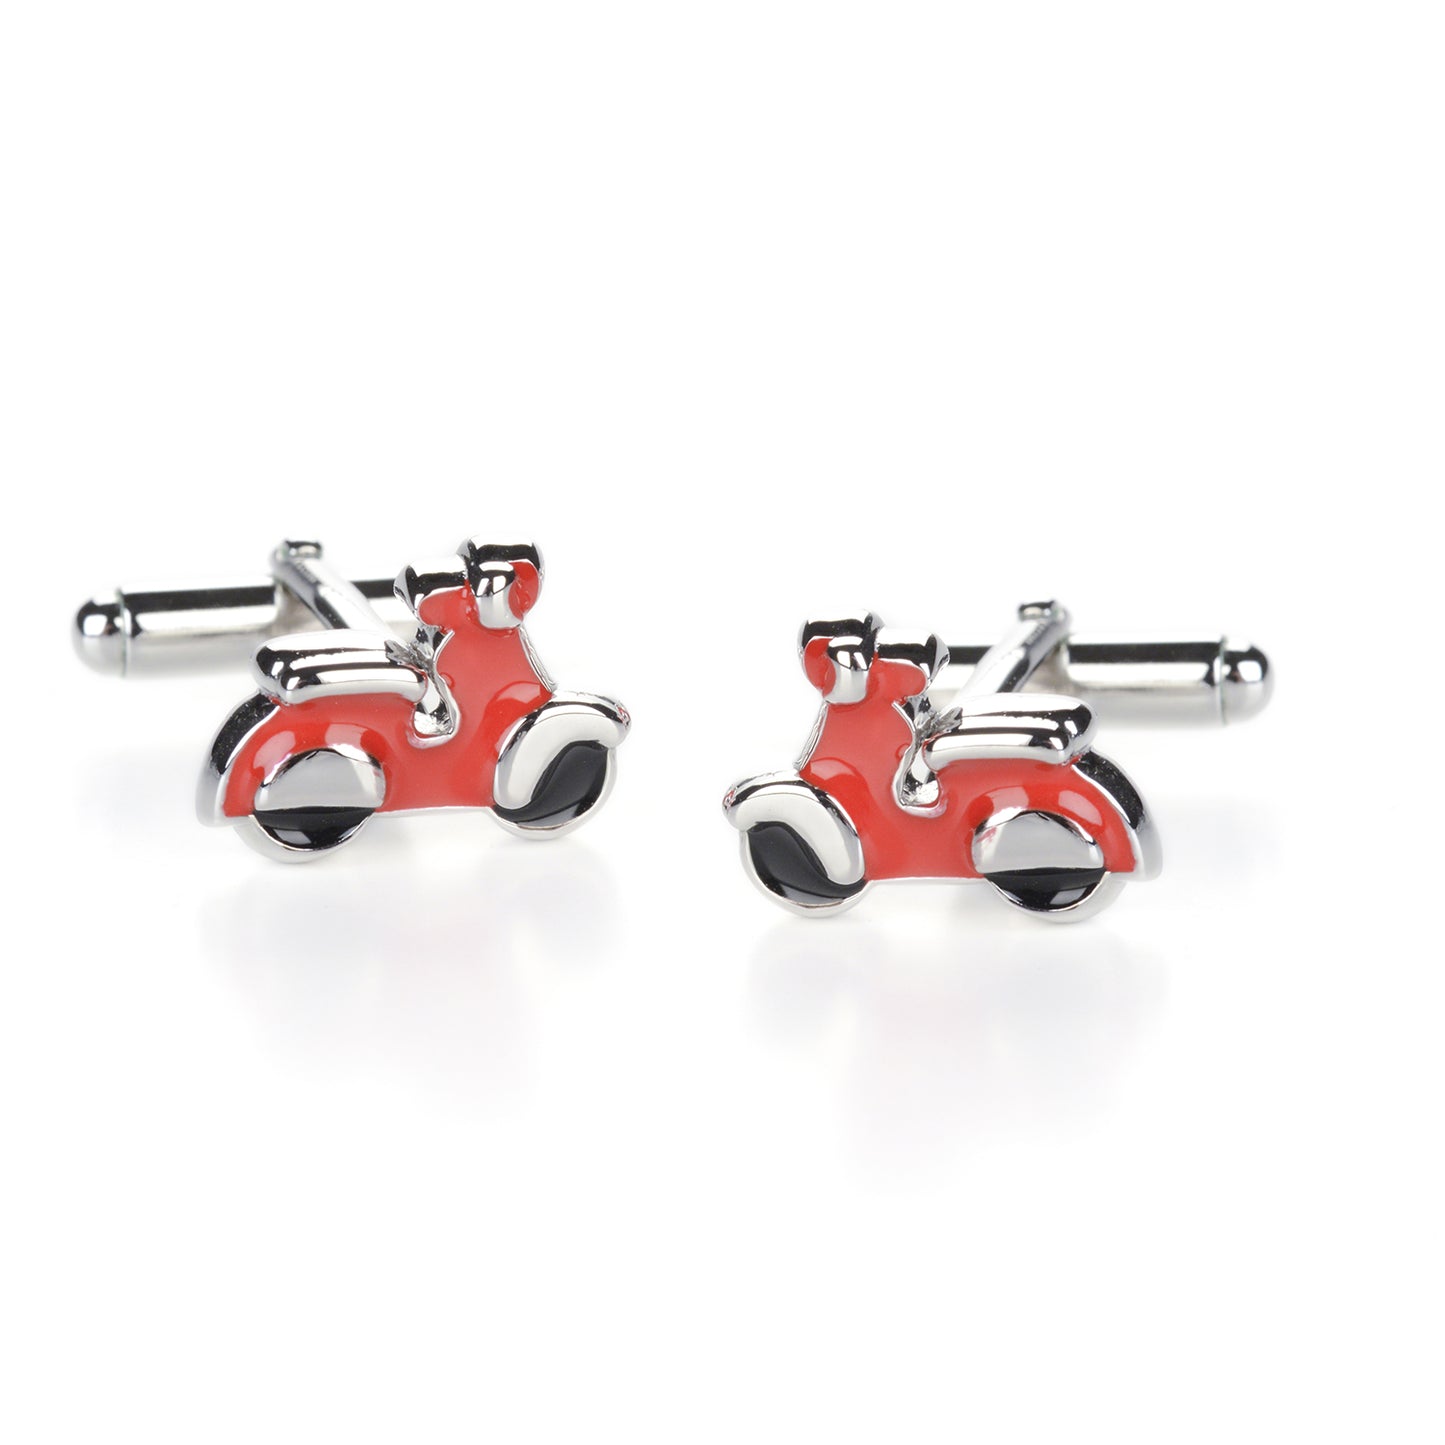 Vespa style scooter cufflinks in silver and red enamel